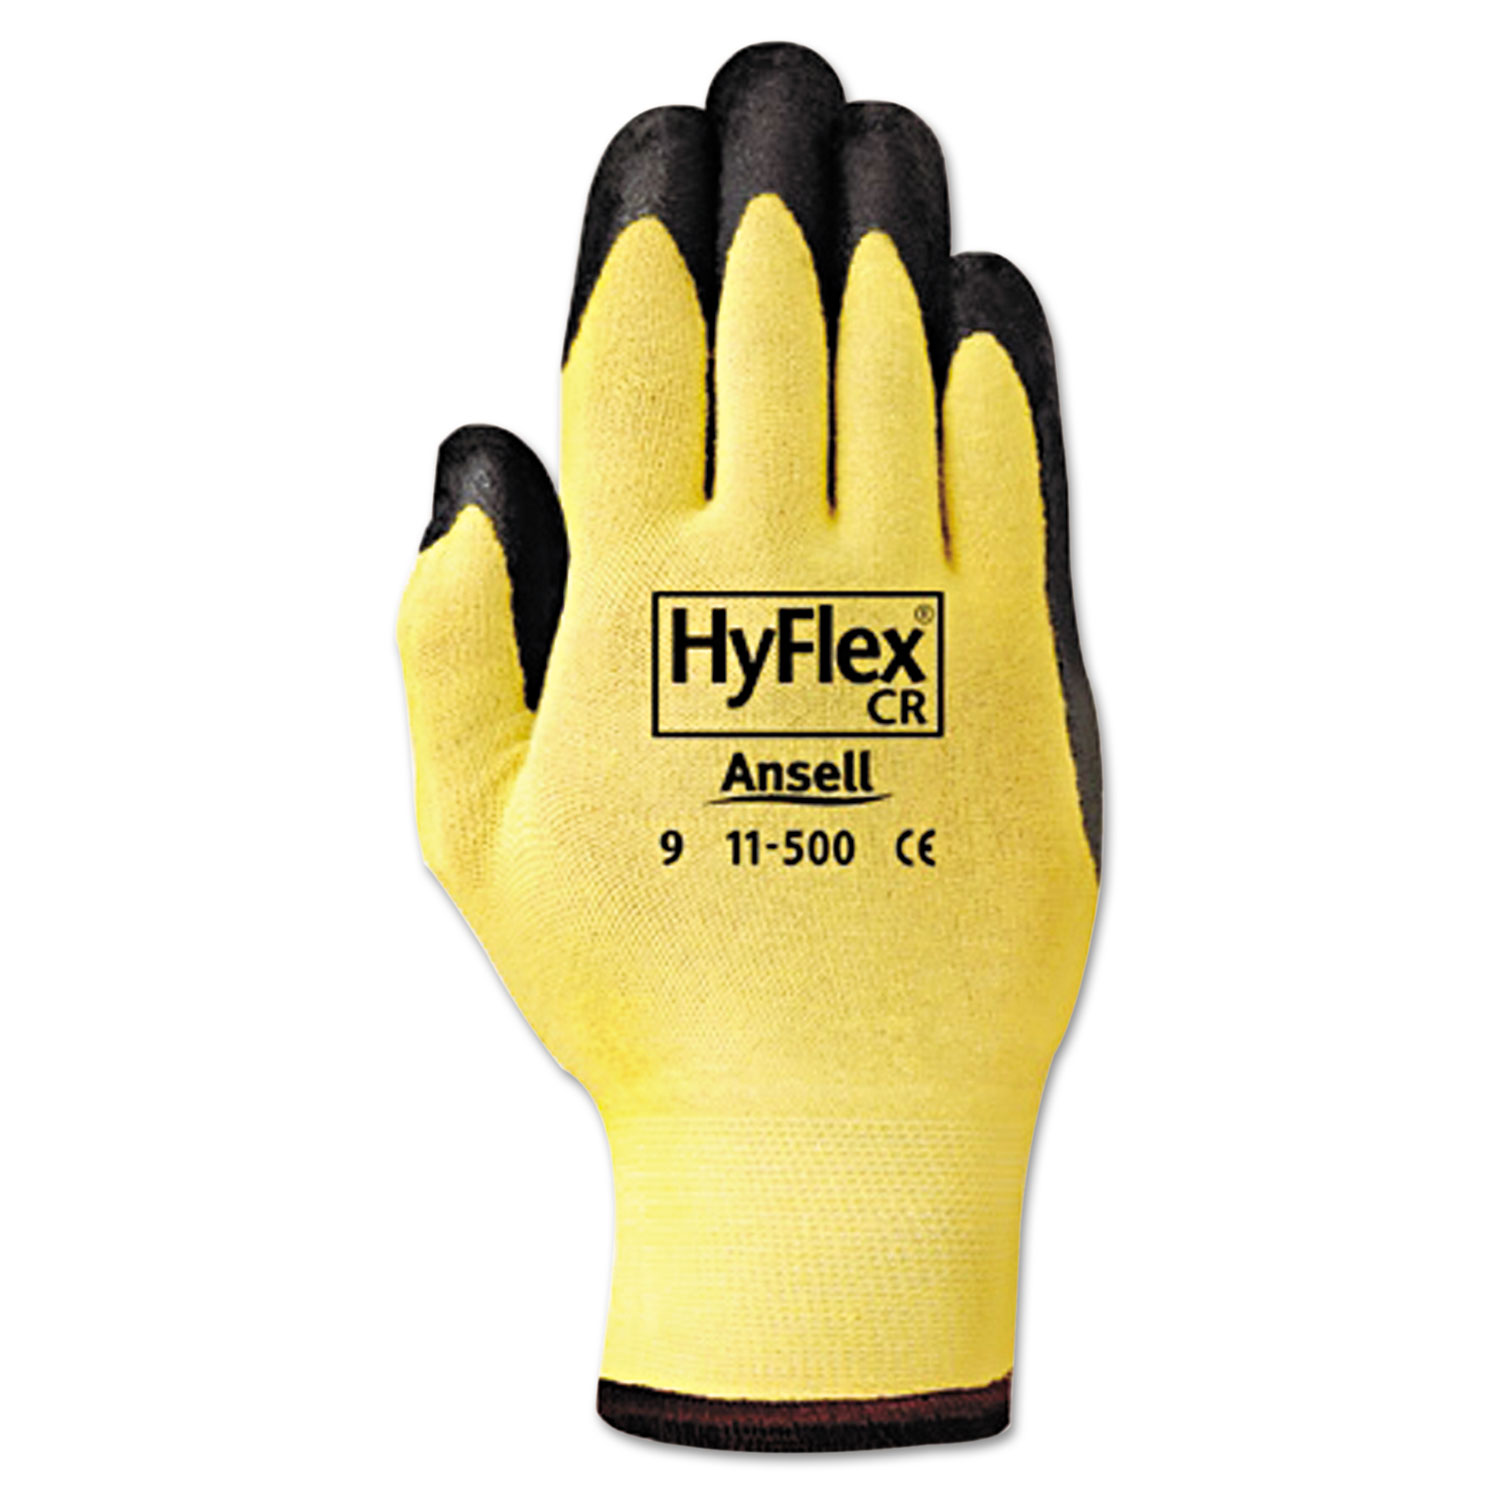  AnsellPro 103339 HyFlex Ultra Lightweight Assembly Gloves, Black/Yellow, Size 10, 12 Pairs (ANS1150010) 